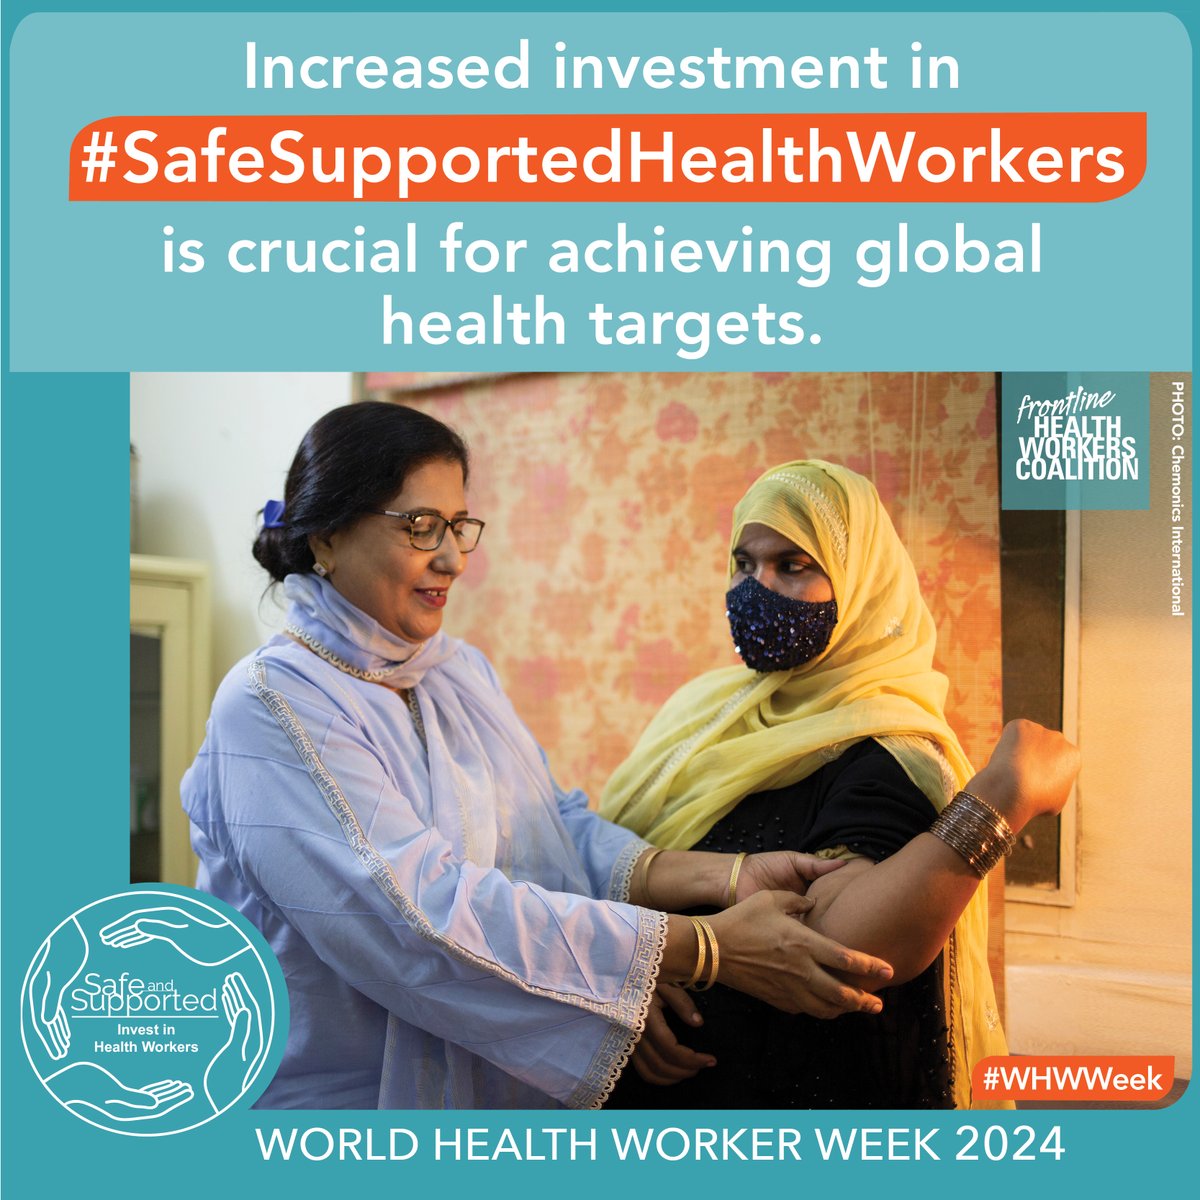 There are many global, regional, and country commitments to #SafeSupportedHealthWorkers but policymakers need to translate promises and policies into long-term investments and integration in health systems. #WHWWeek